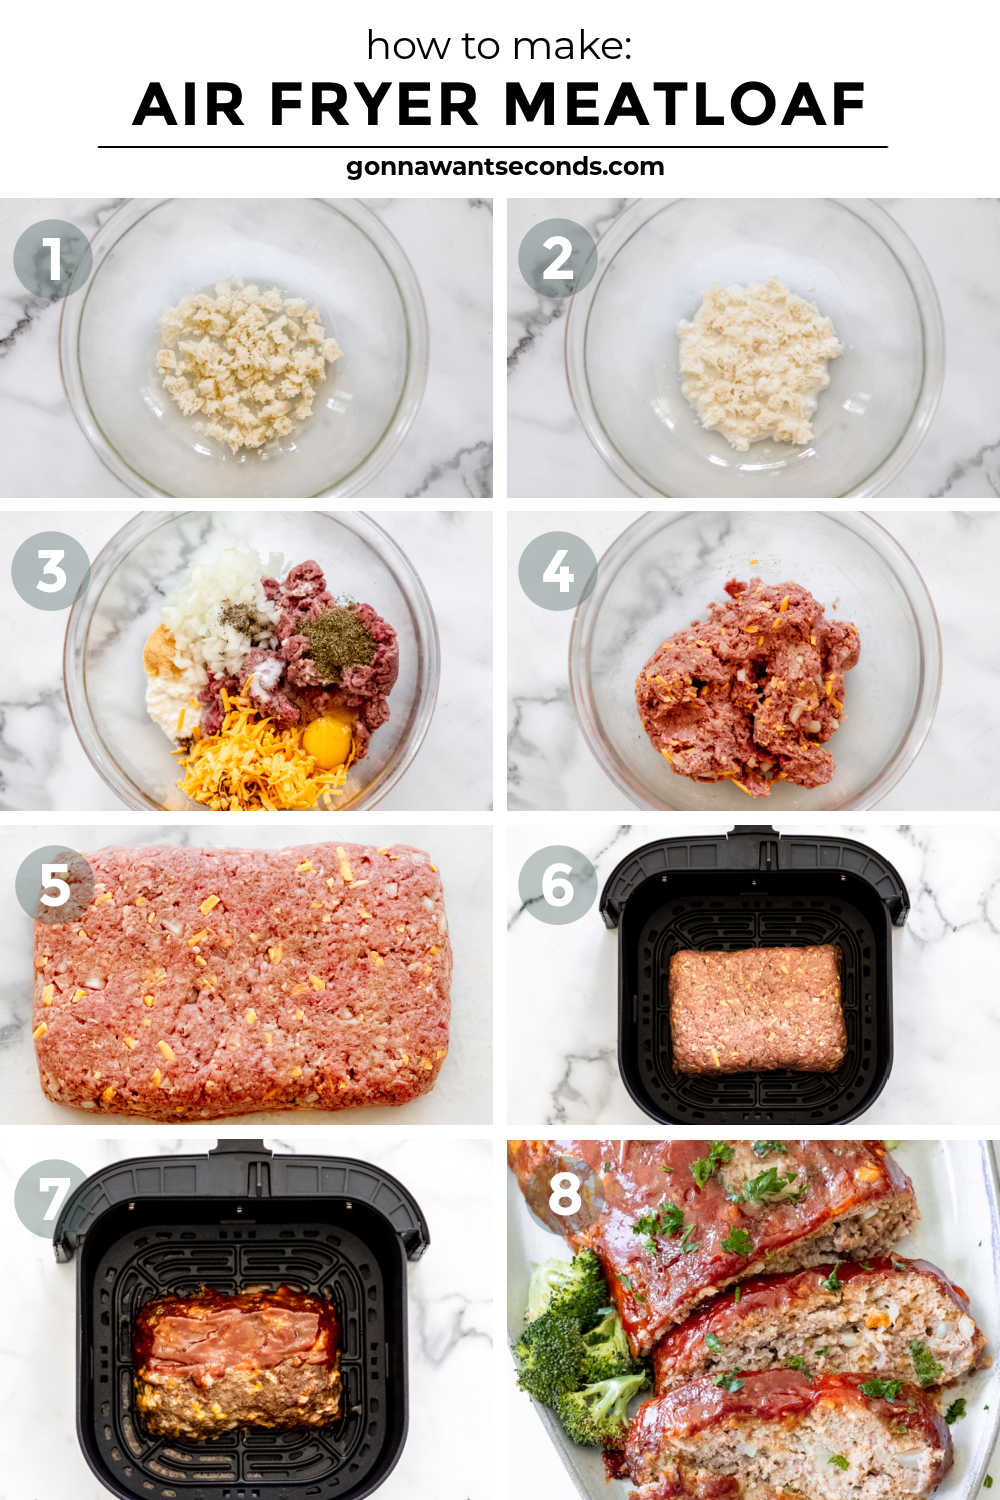 step by step how to make air fryer meatloaf